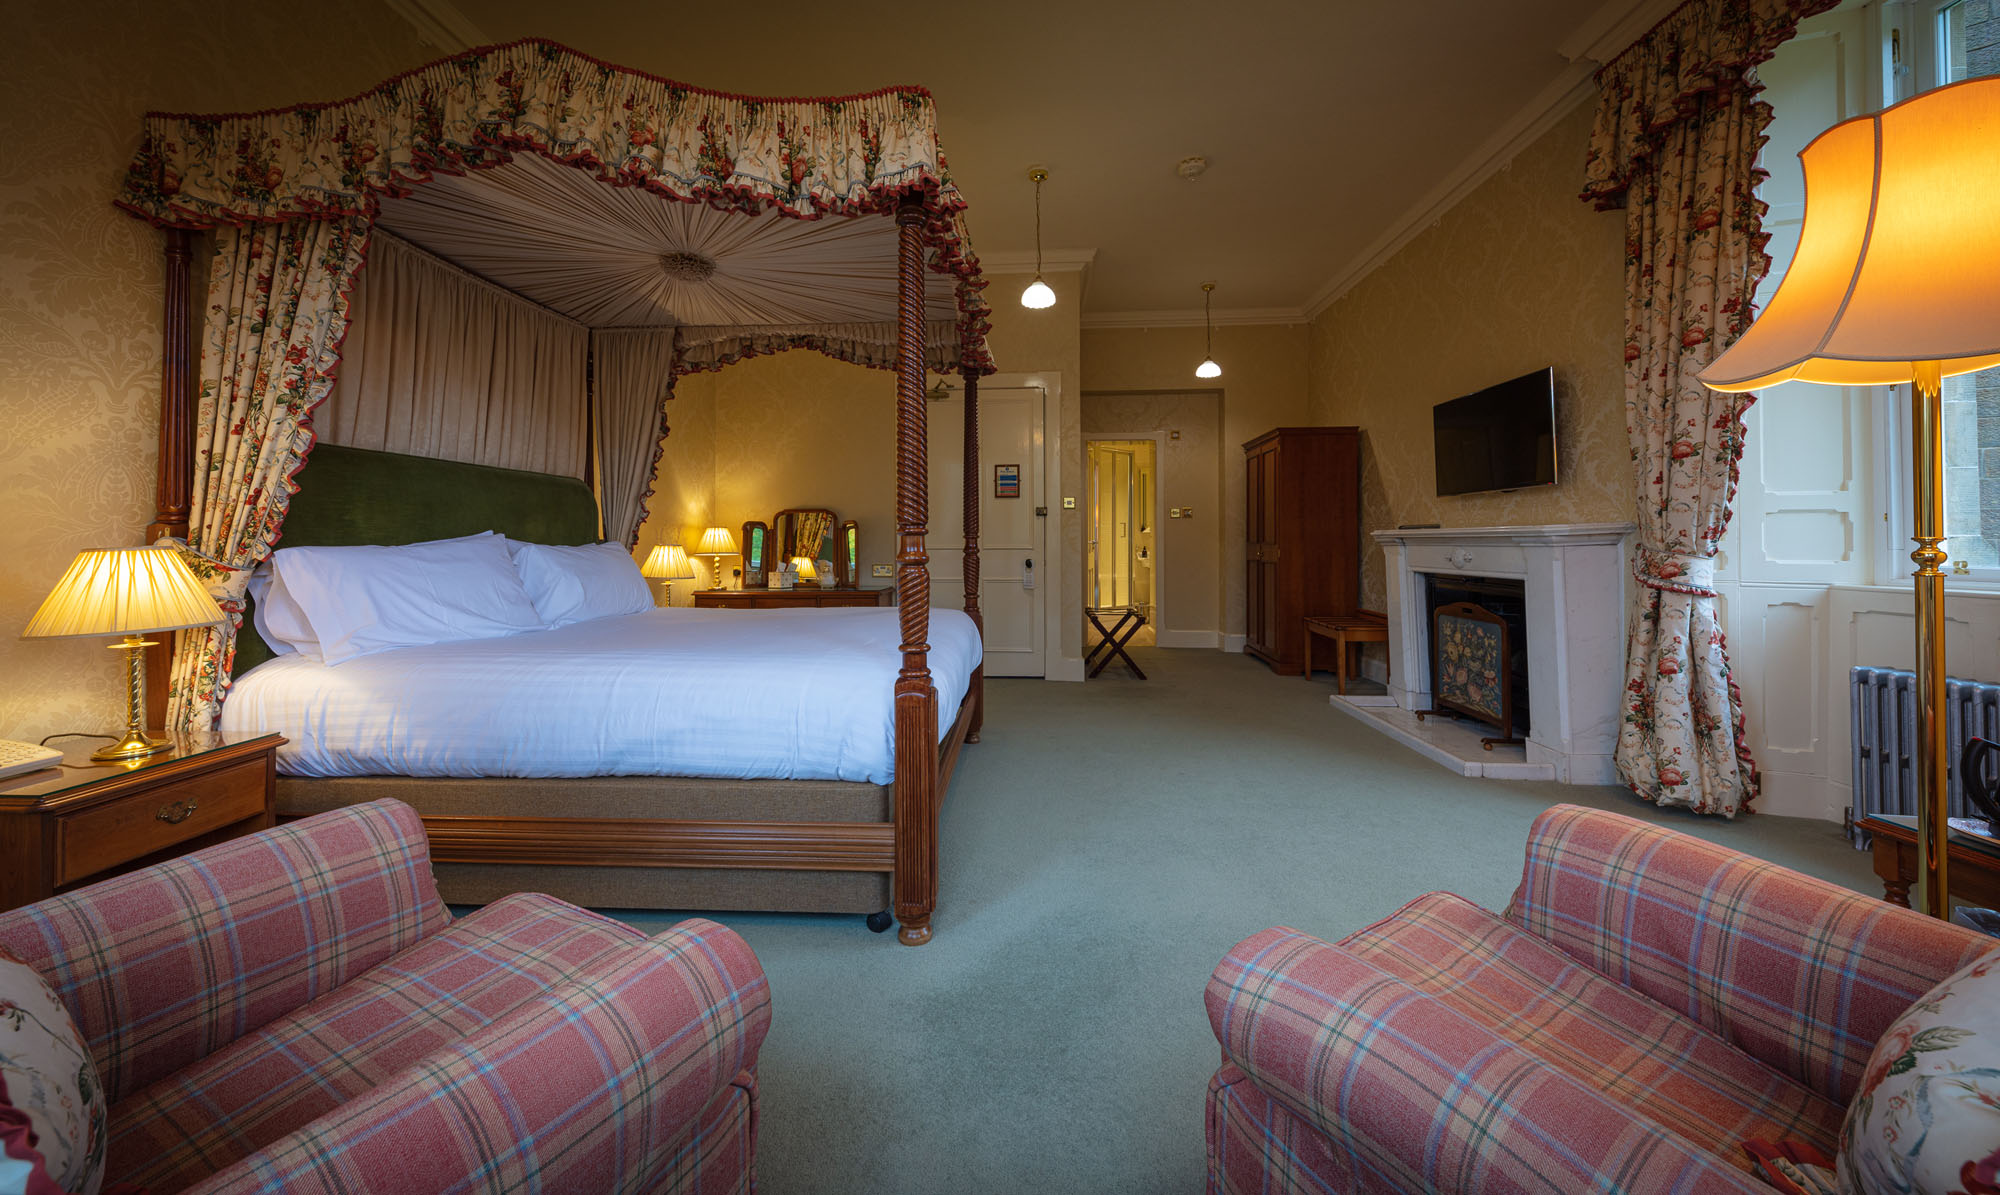 Bedrooms at glengarry castle hotel